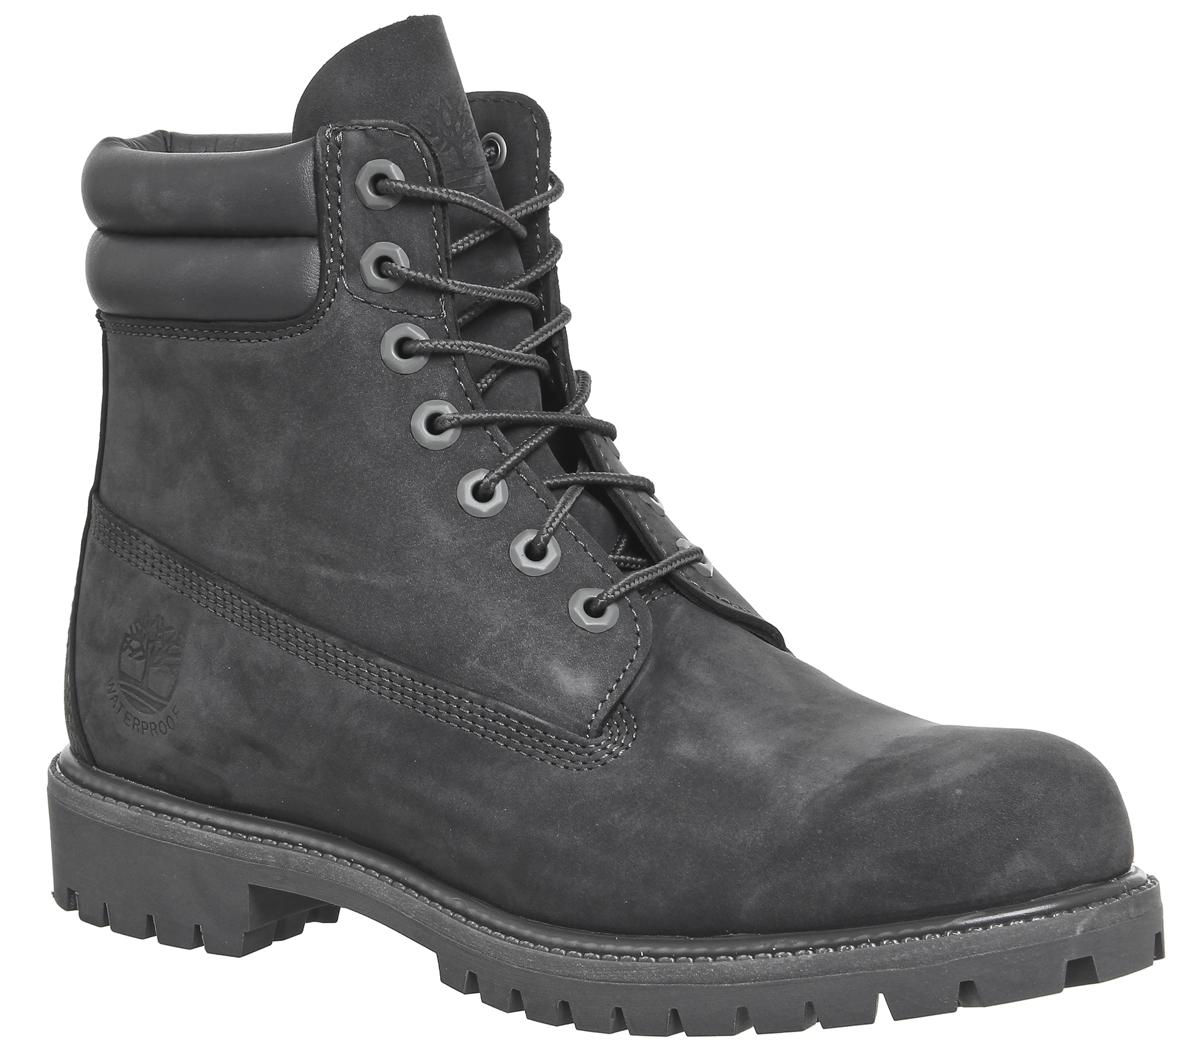 grey 6 inch timberland boots